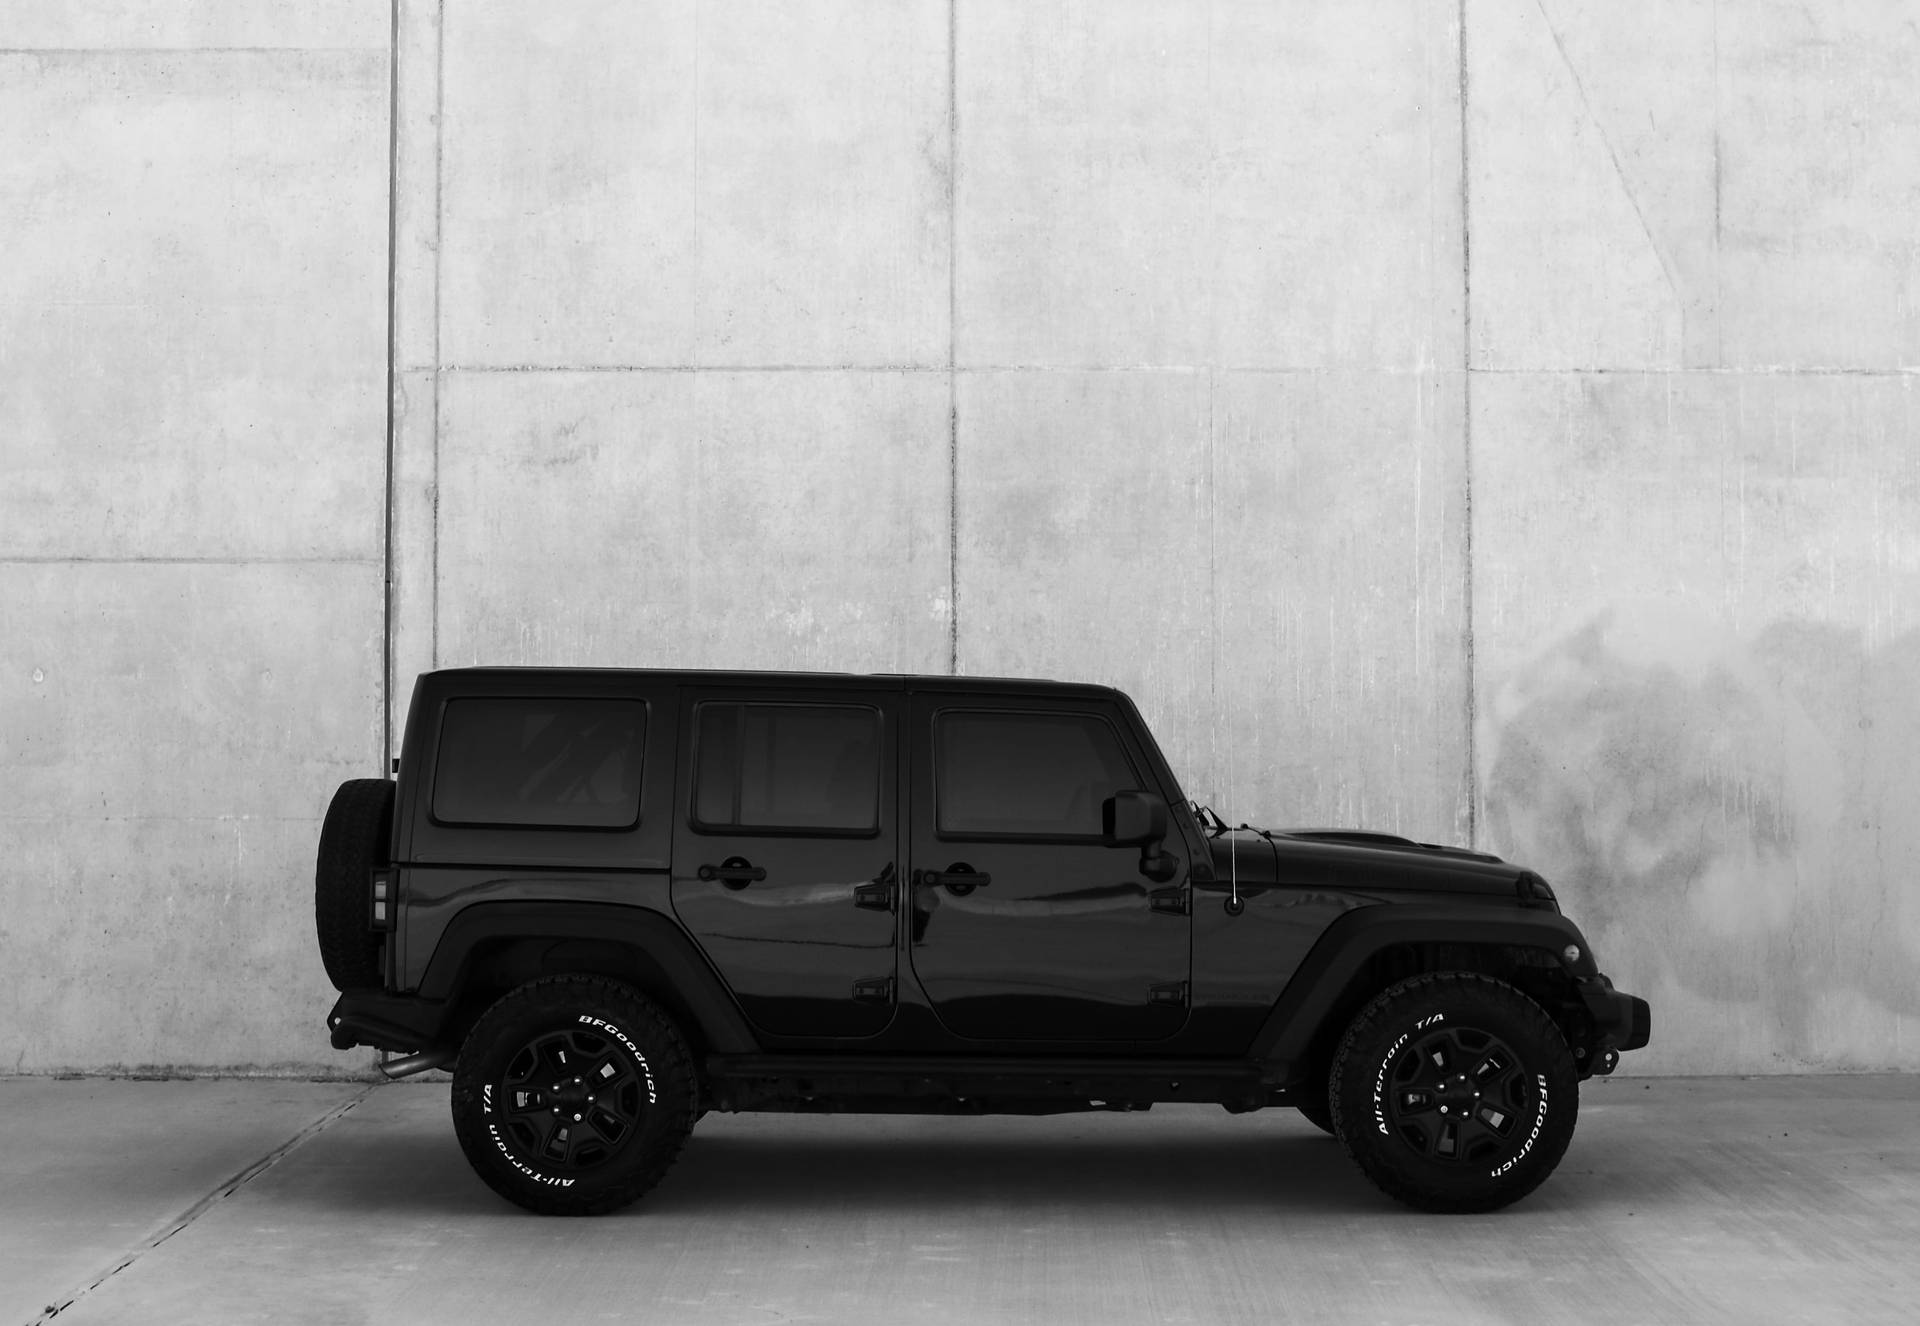 Free Black Jeep Wallpaper Downloads, [100+] Black Jeep Wallpapers for FREE  